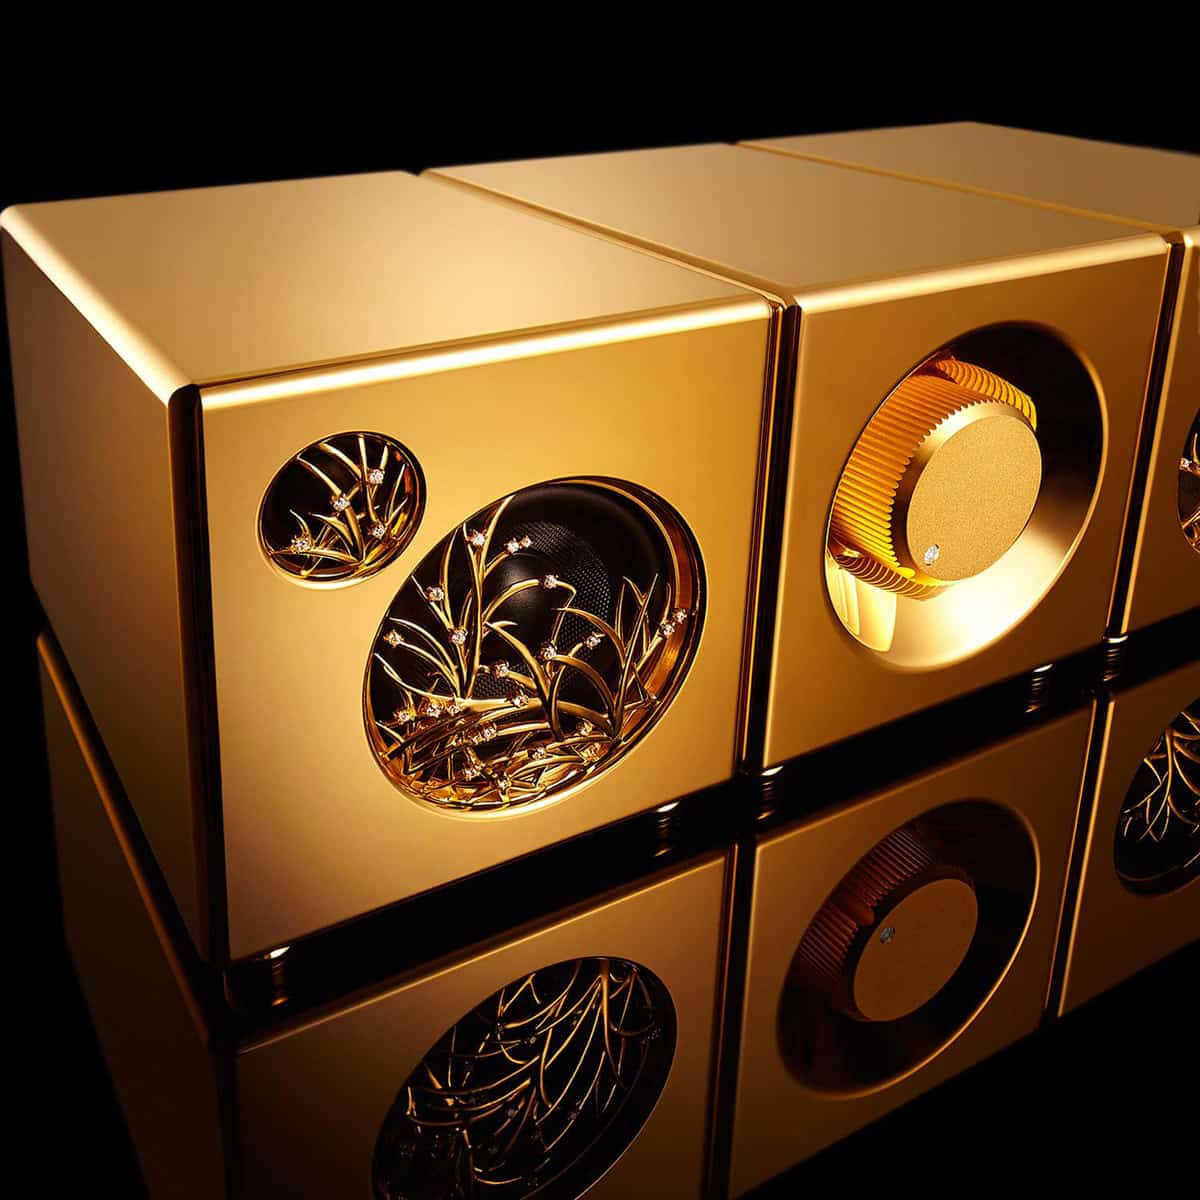 This one if its kind $5 mil sound system is made from 60kgs of gold and diamonds